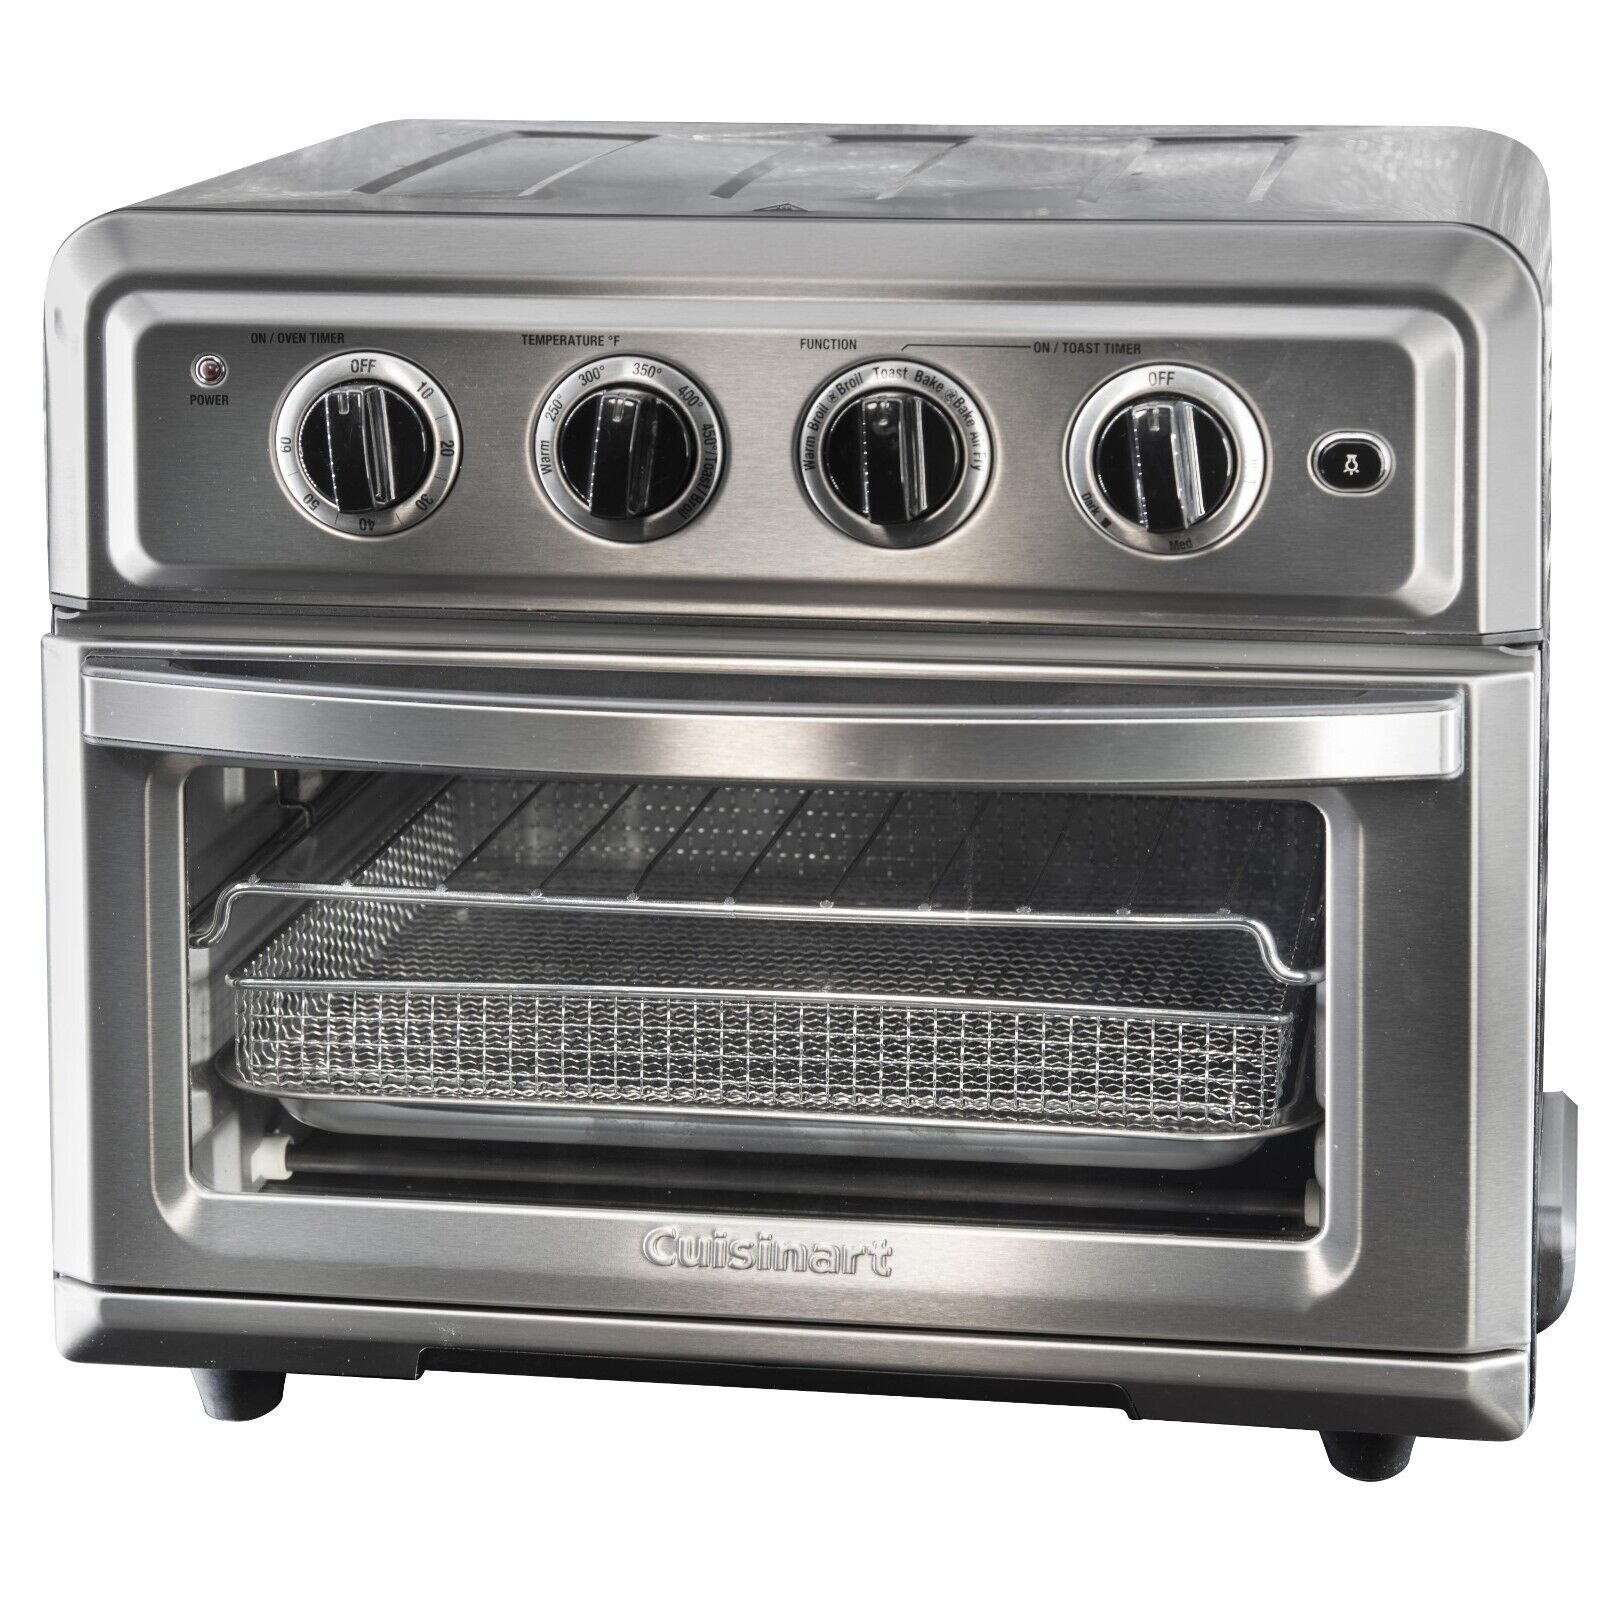 Cuisinart TOA-60 Convection Toaster Oven Air Fryer - $140.25